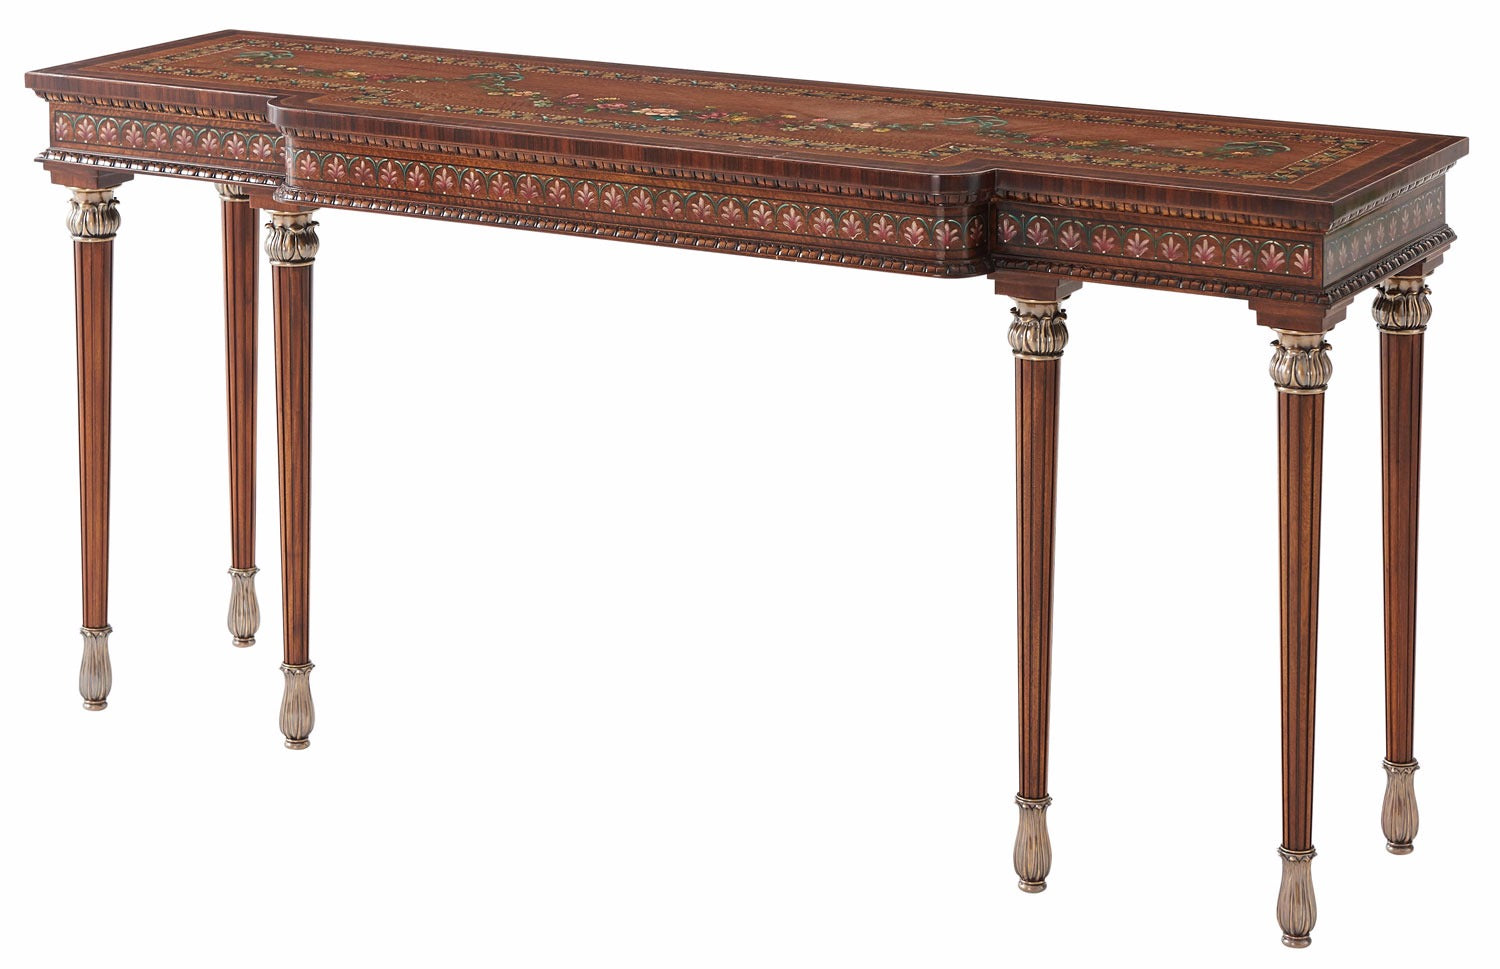 Thomas Sheraton style floral decorated Console table